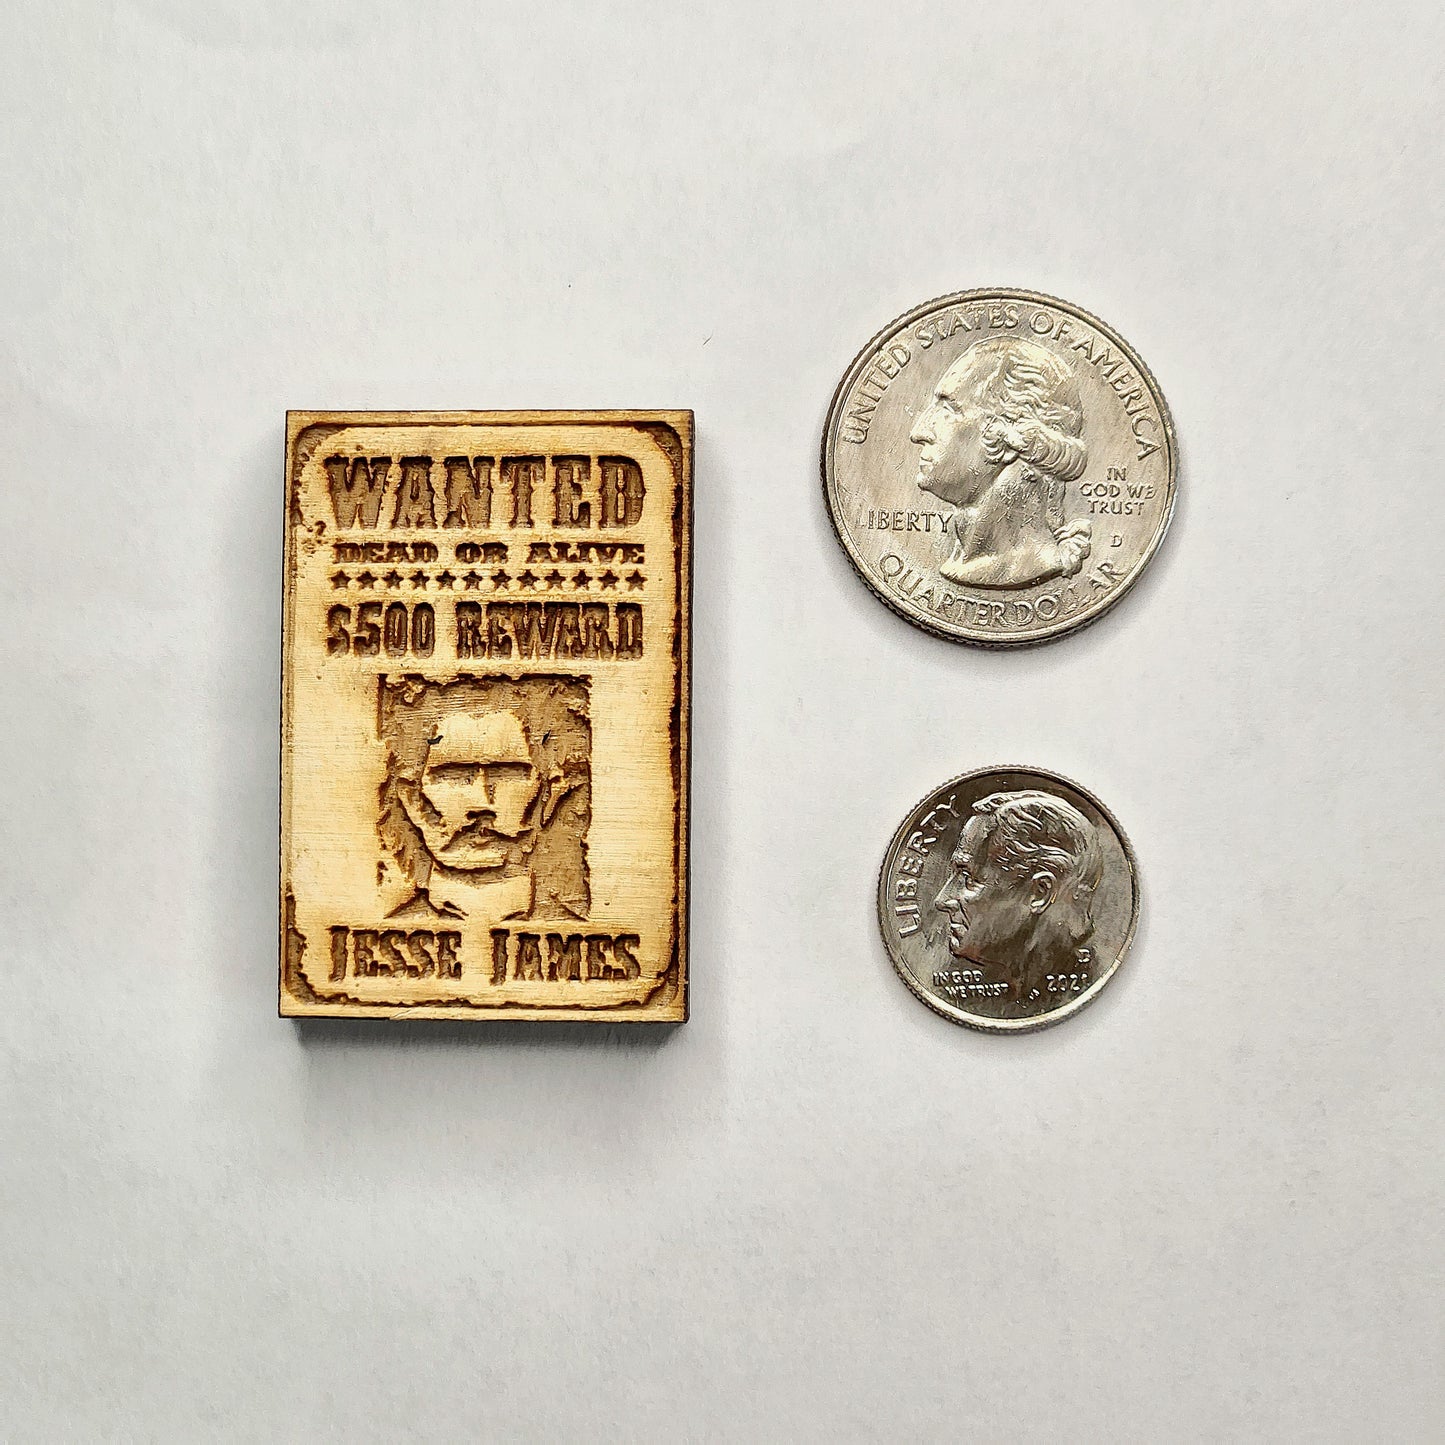 'Jesse James Wanted' Magnet